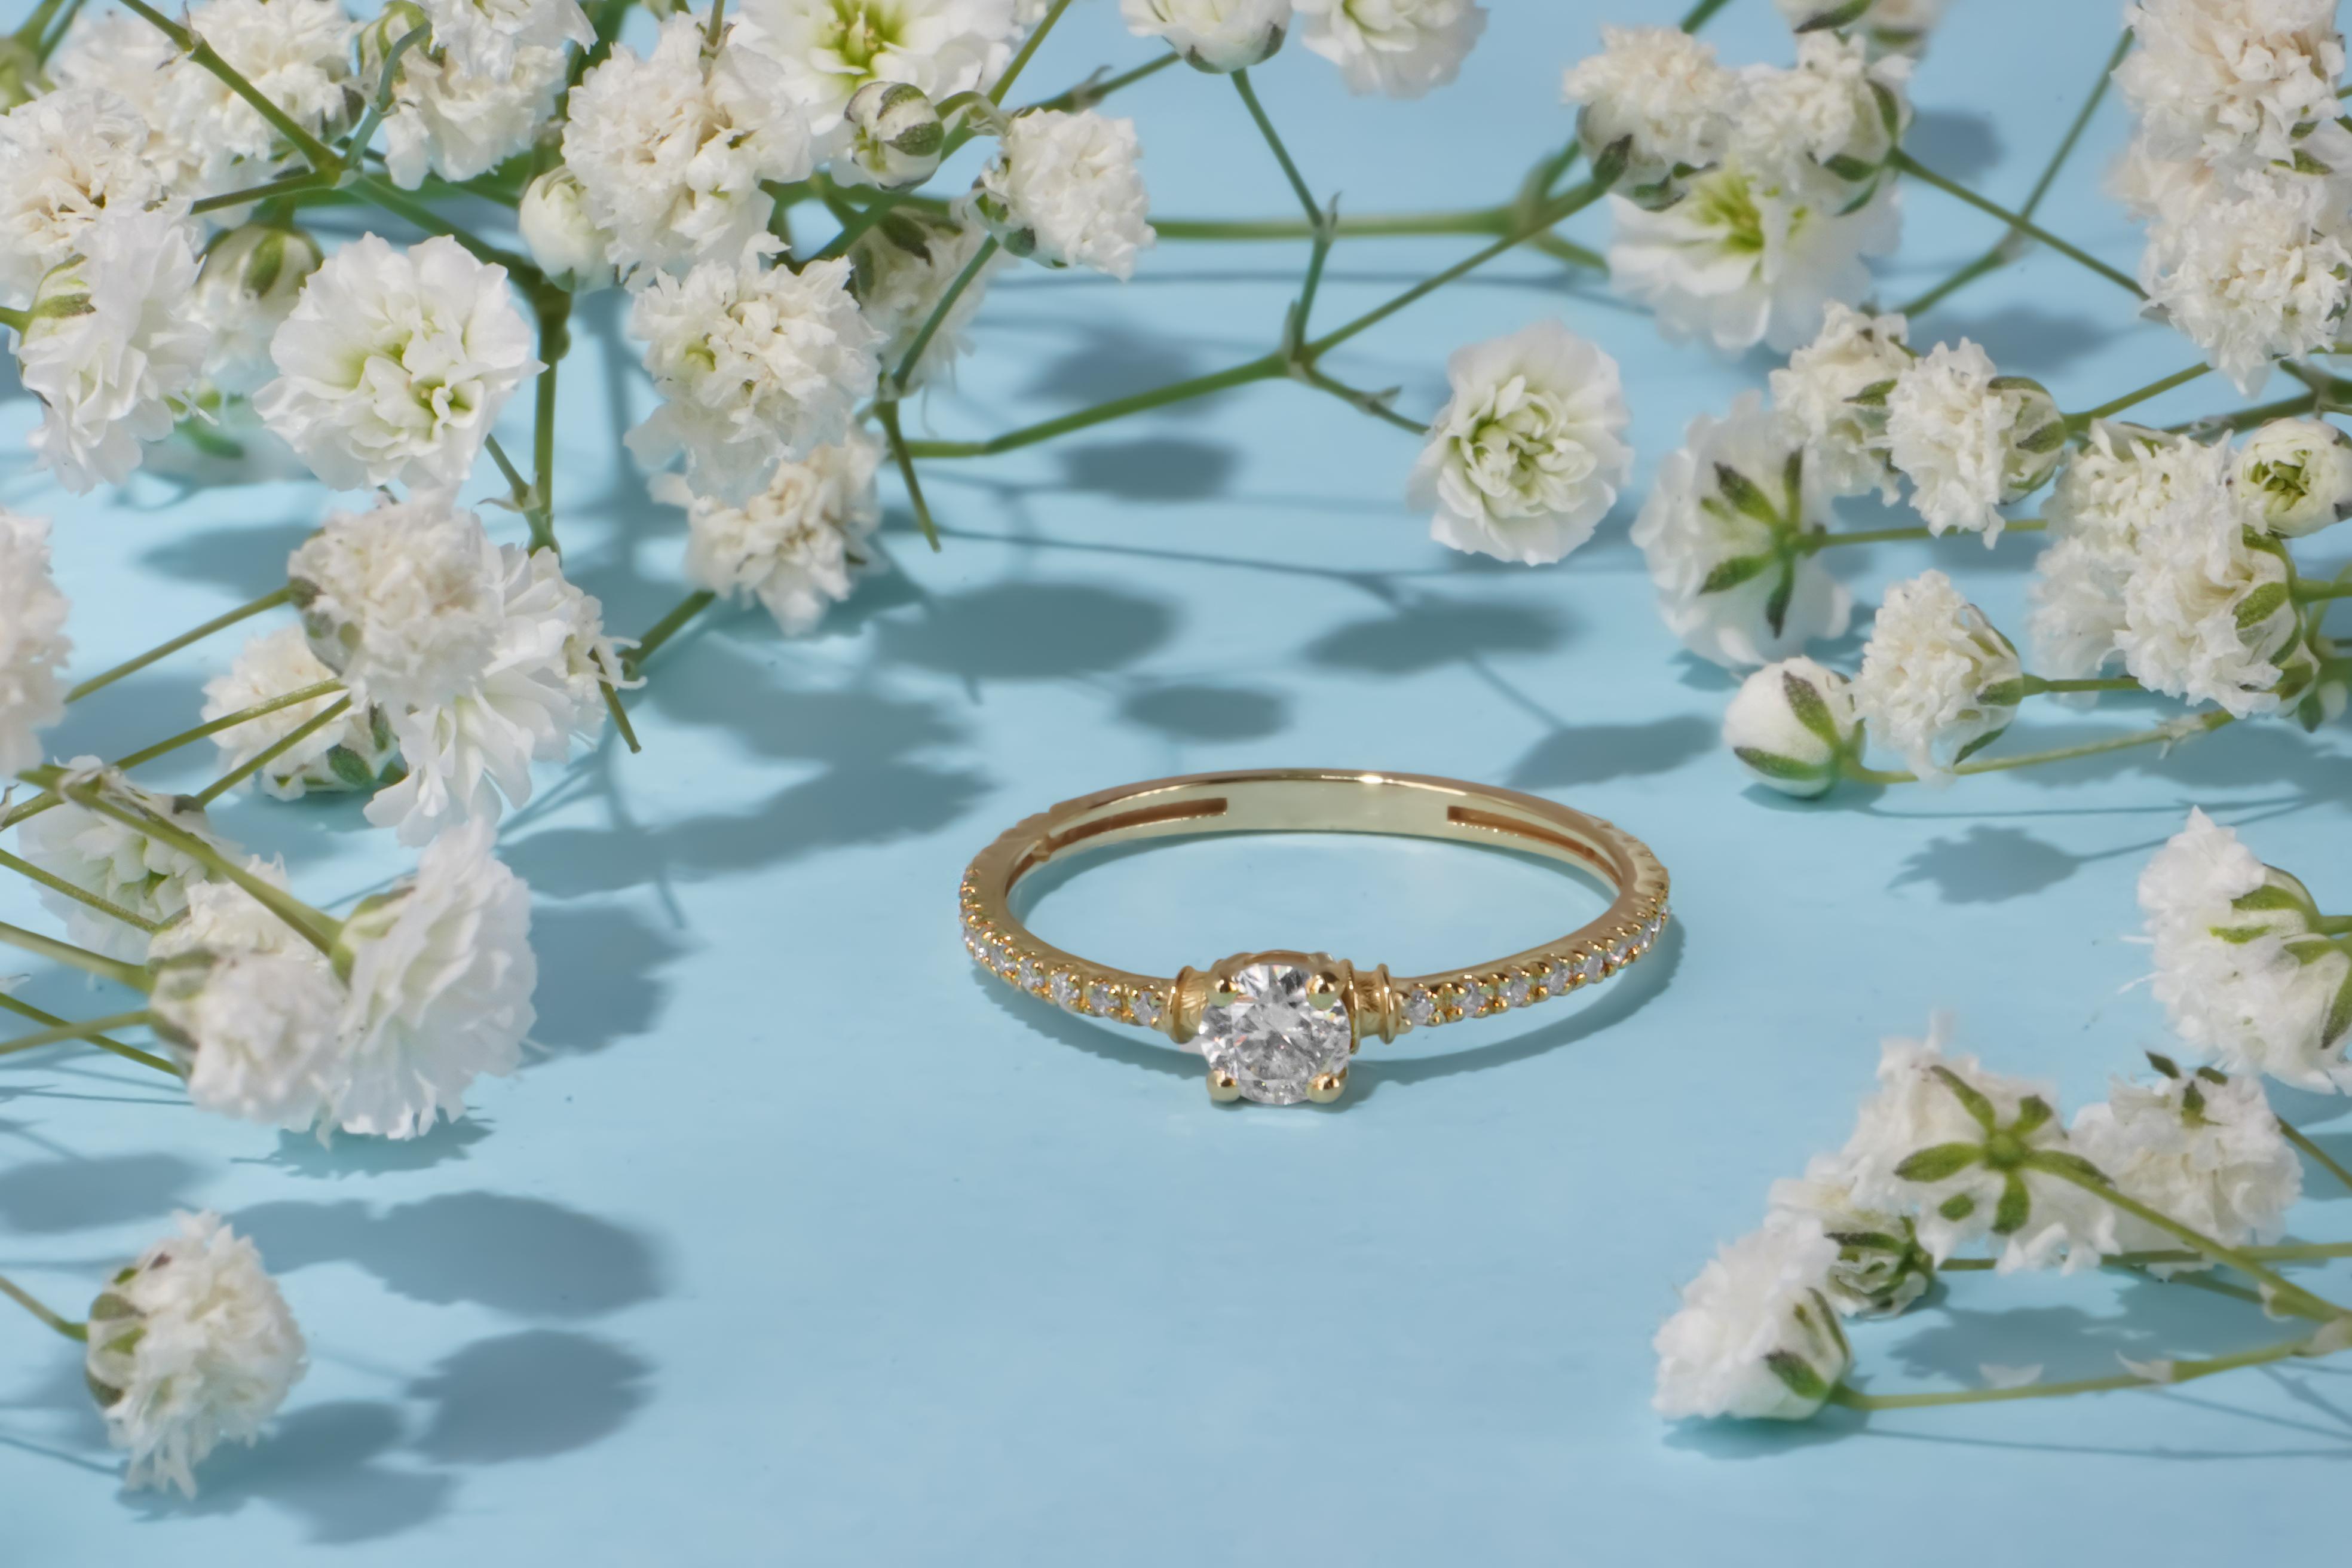 If you are looking for a unique and meaningful gift for yourself or someone special, you will love our 18k gold Endalaus ring with moissanite!

This ring is not just a beautiful accessory, but also a symbol of your personality and values. It is made